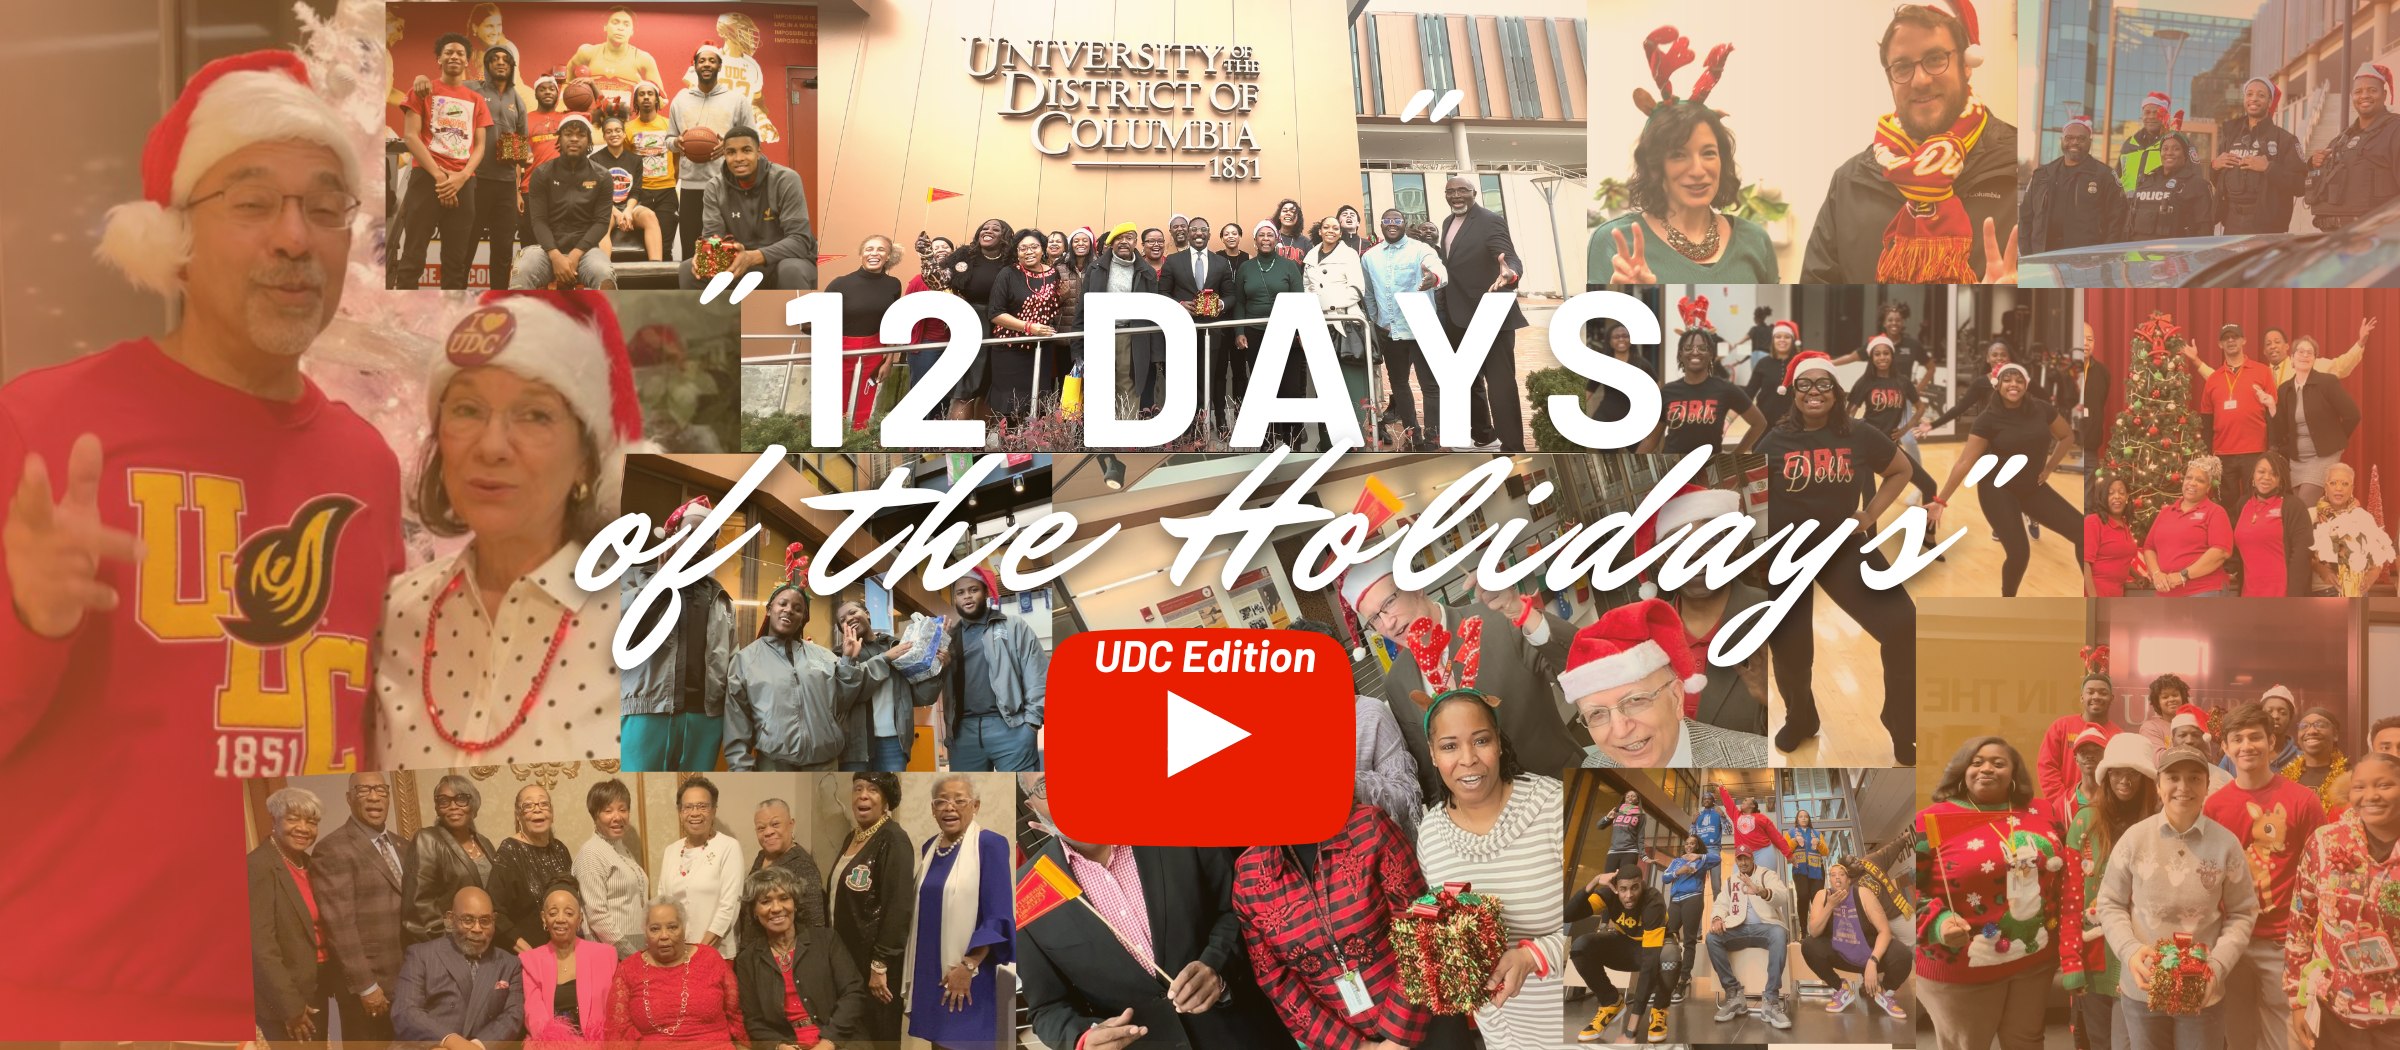 The 12 days of holidays…at UDC!   